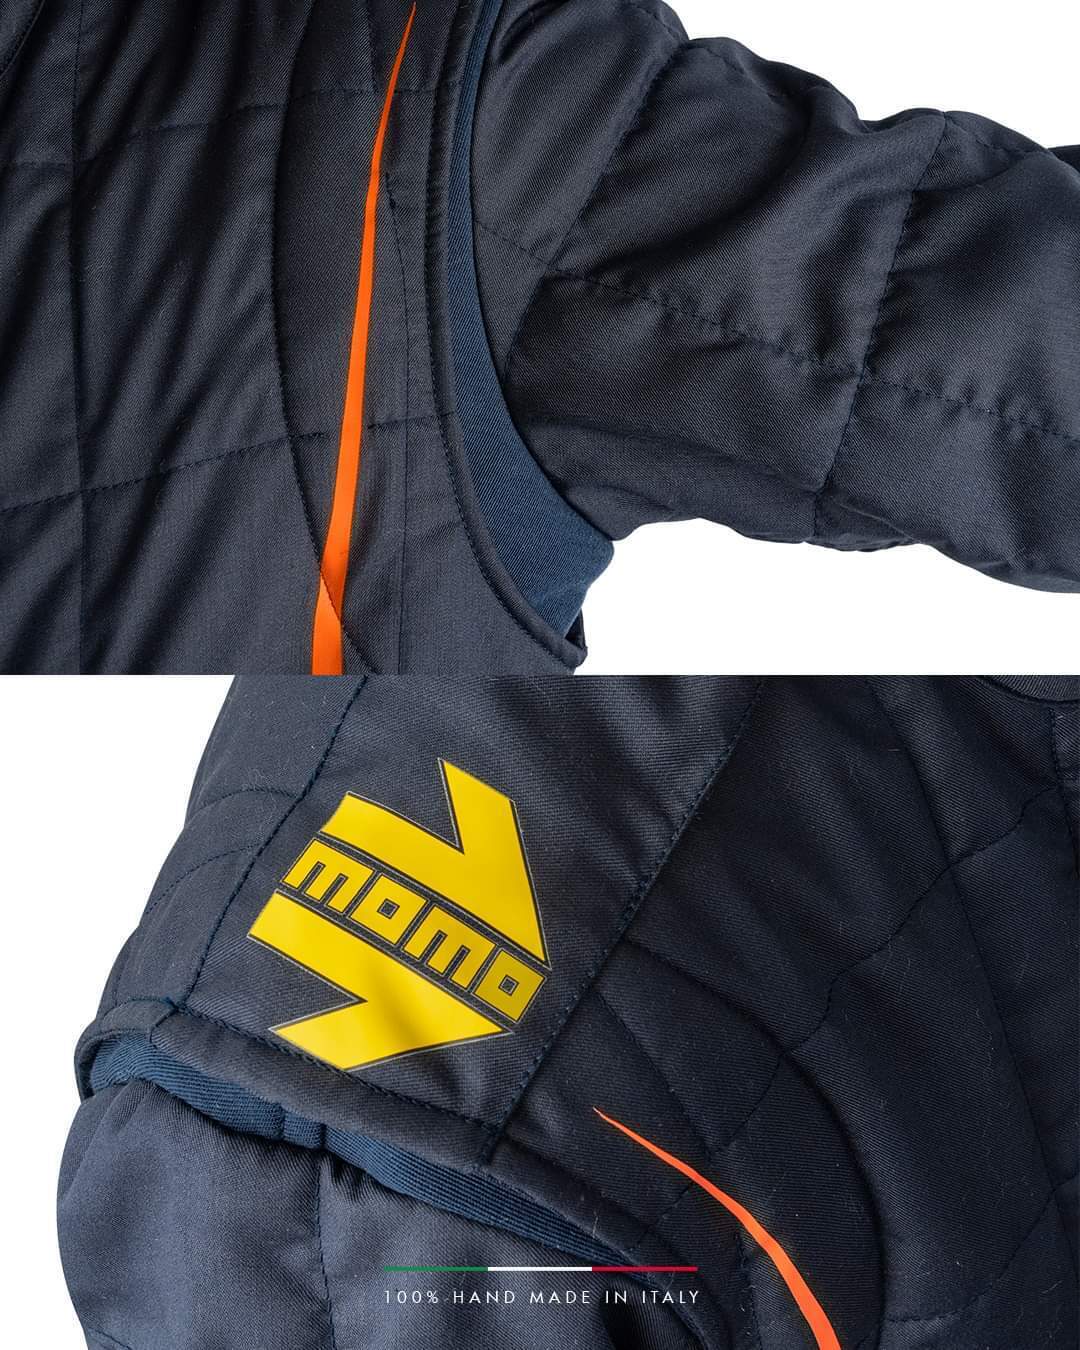 Momo Fireproof Racing Suit - PRO LITE - Navy Blue (FIA Approved)